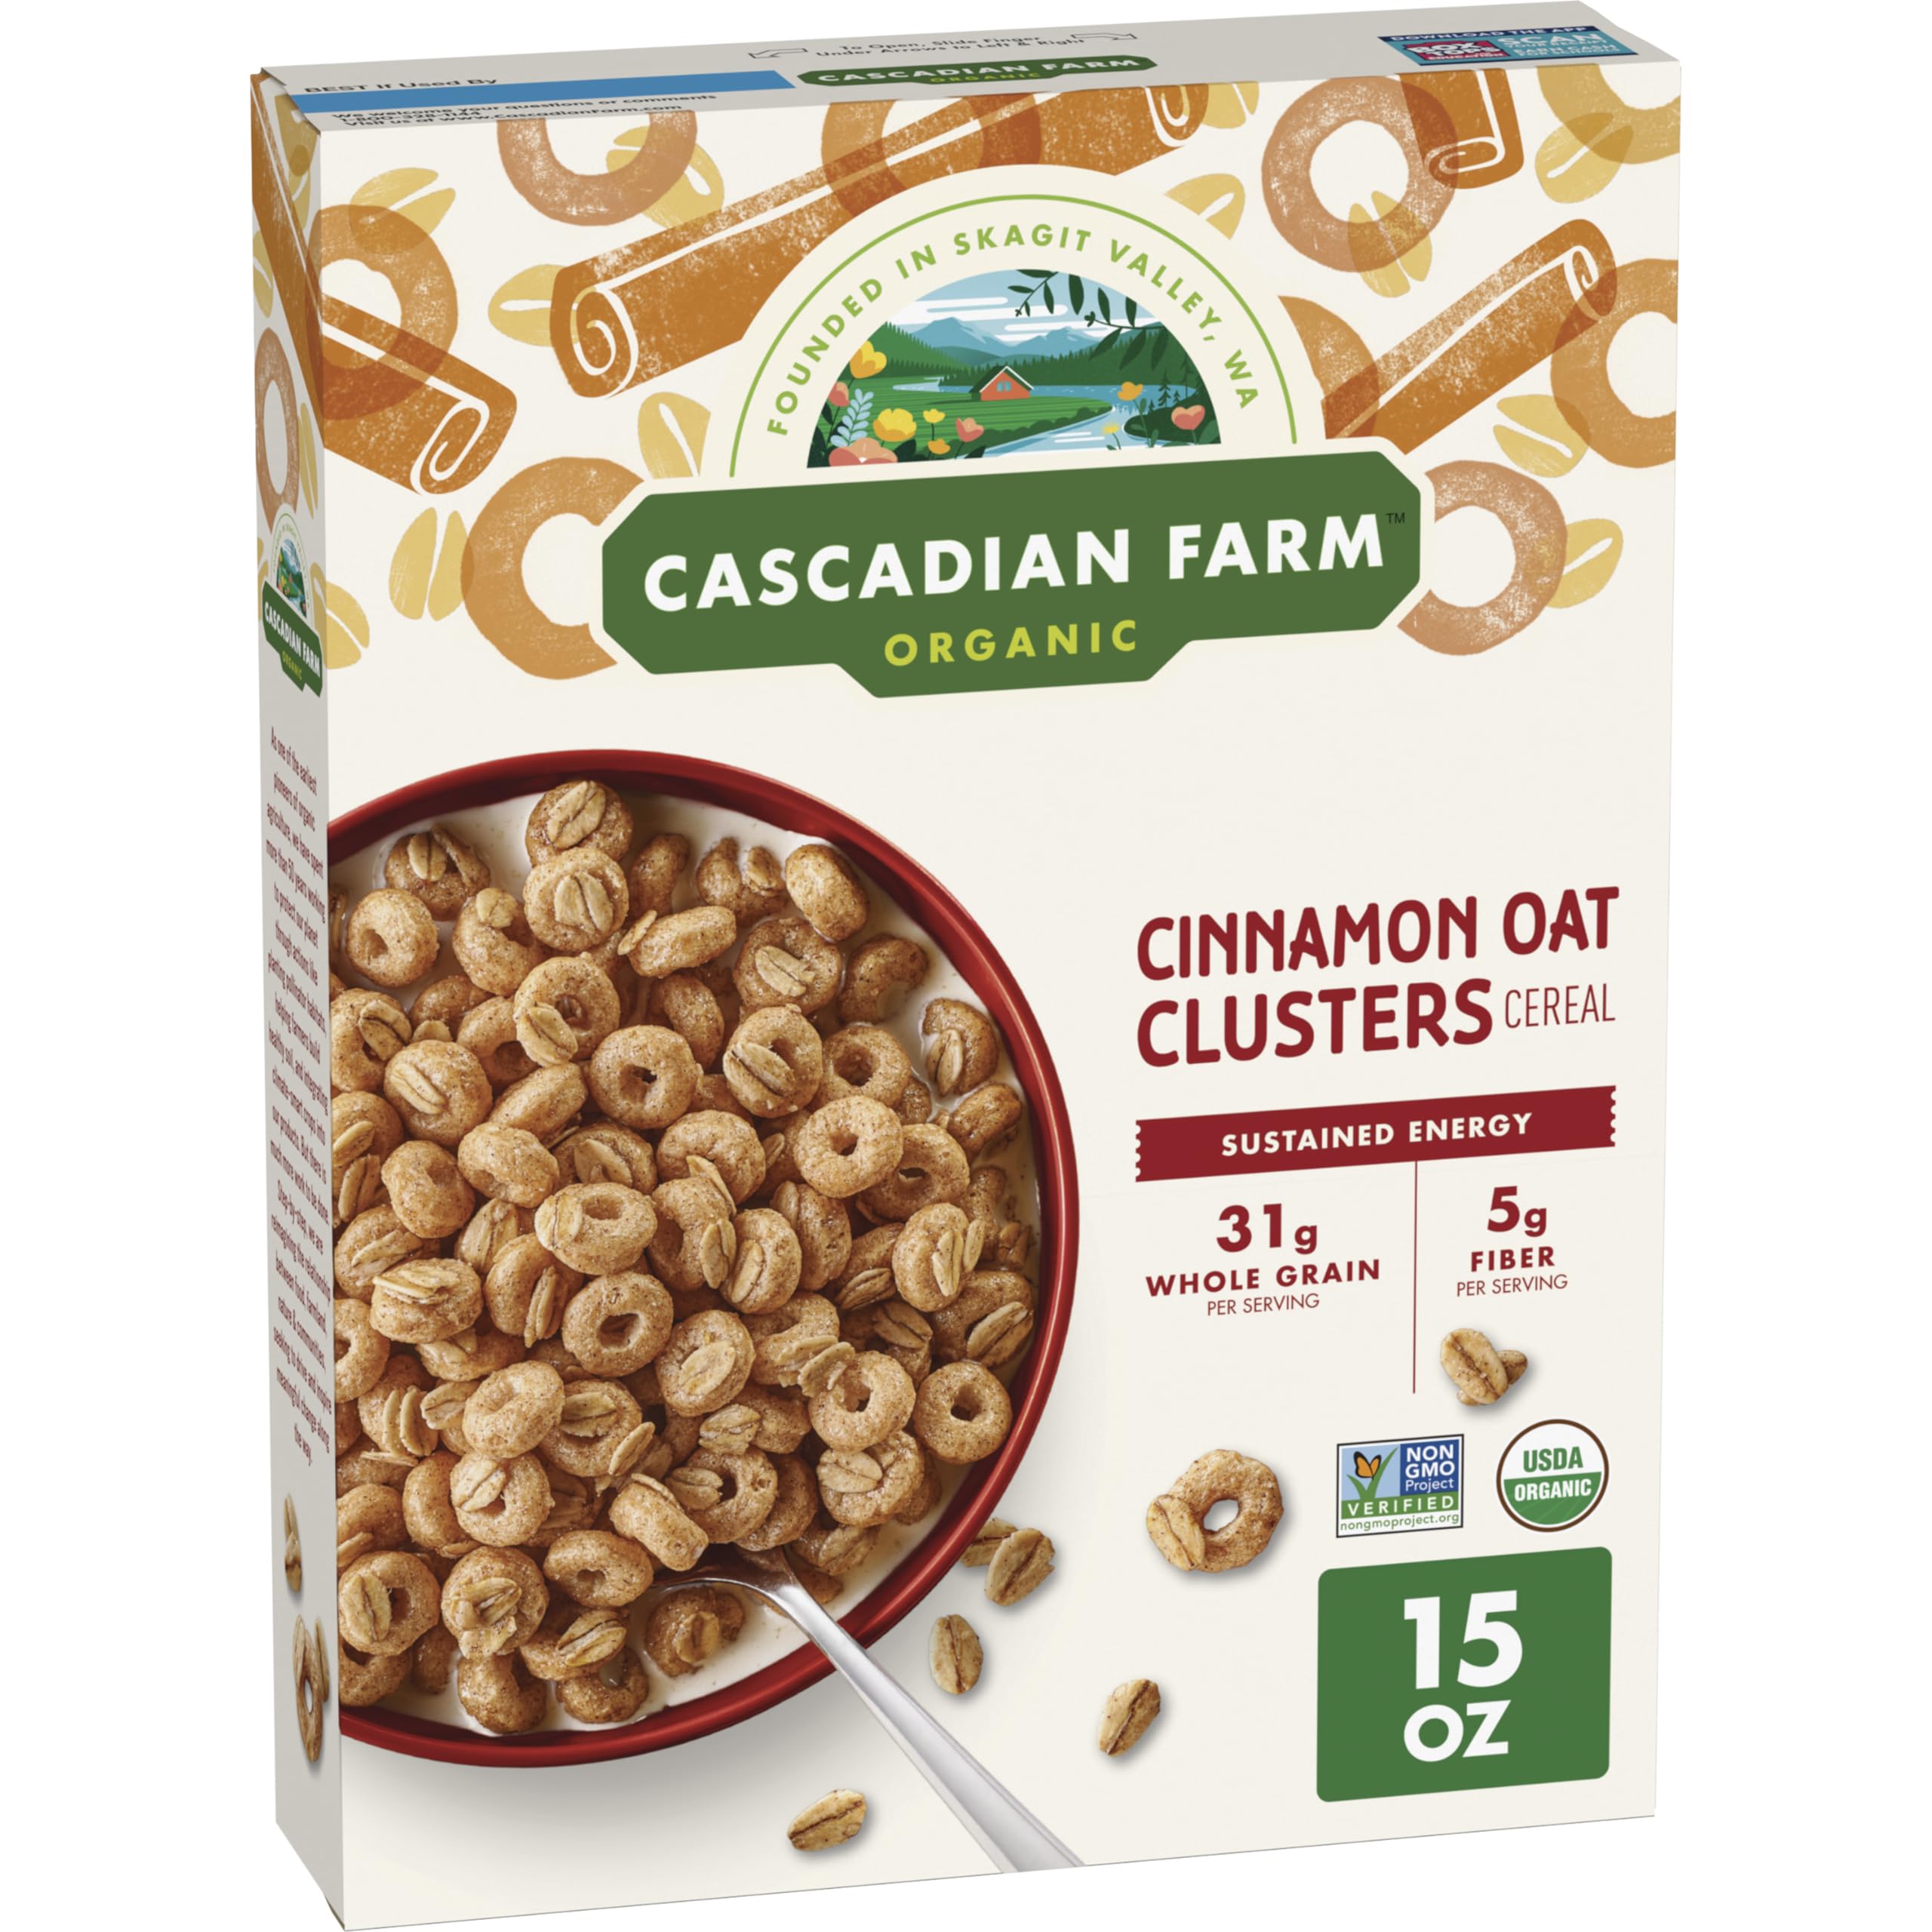 Cascadian Farm Organic Cinnamon Oat Clusters Breakfast Cereal, Made With Whole Grain, Non-GMO, 15 oz $4.38 after coupon